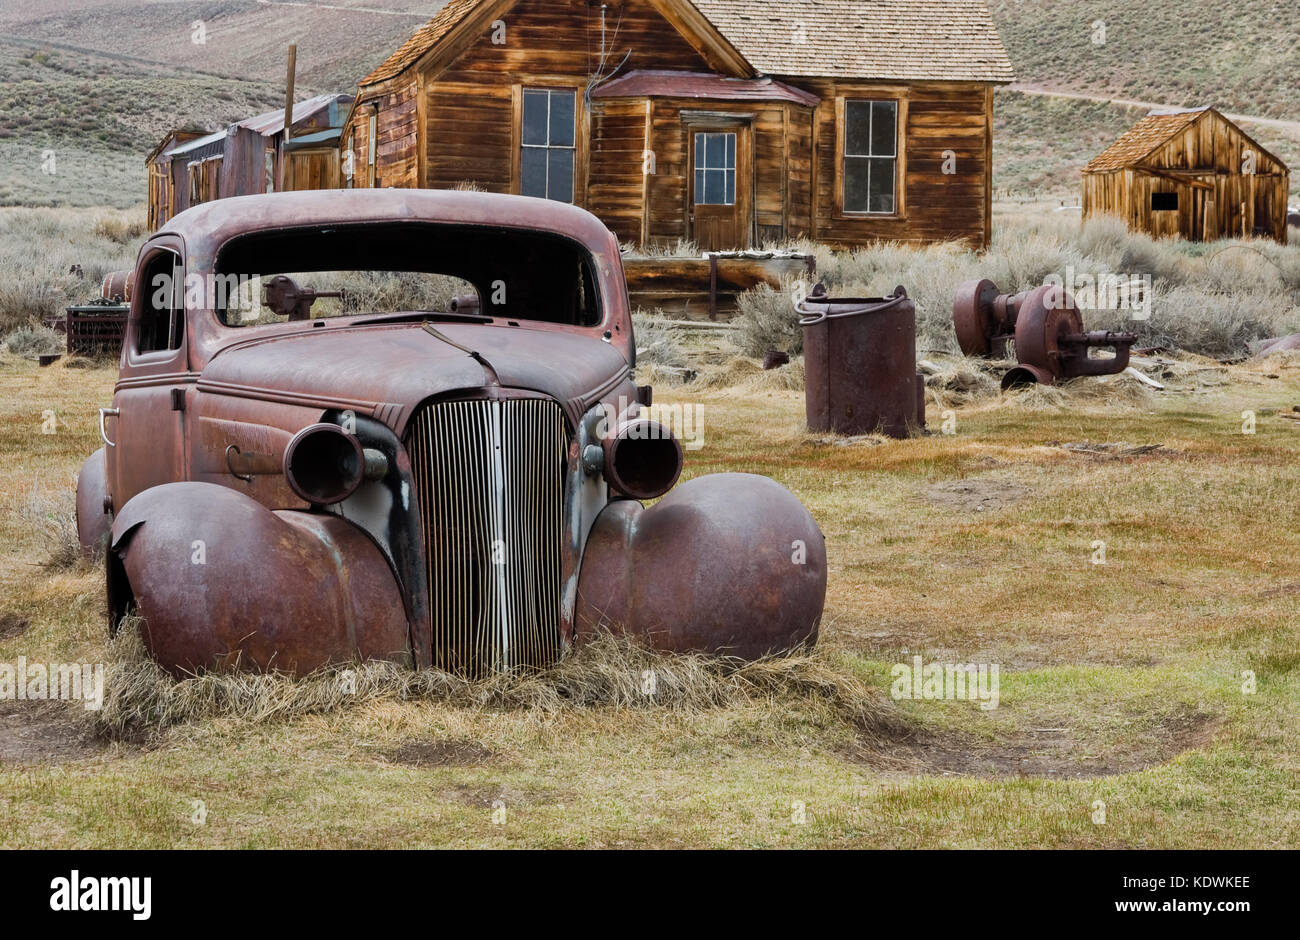 Bodie a ghost town in California Stock Photo